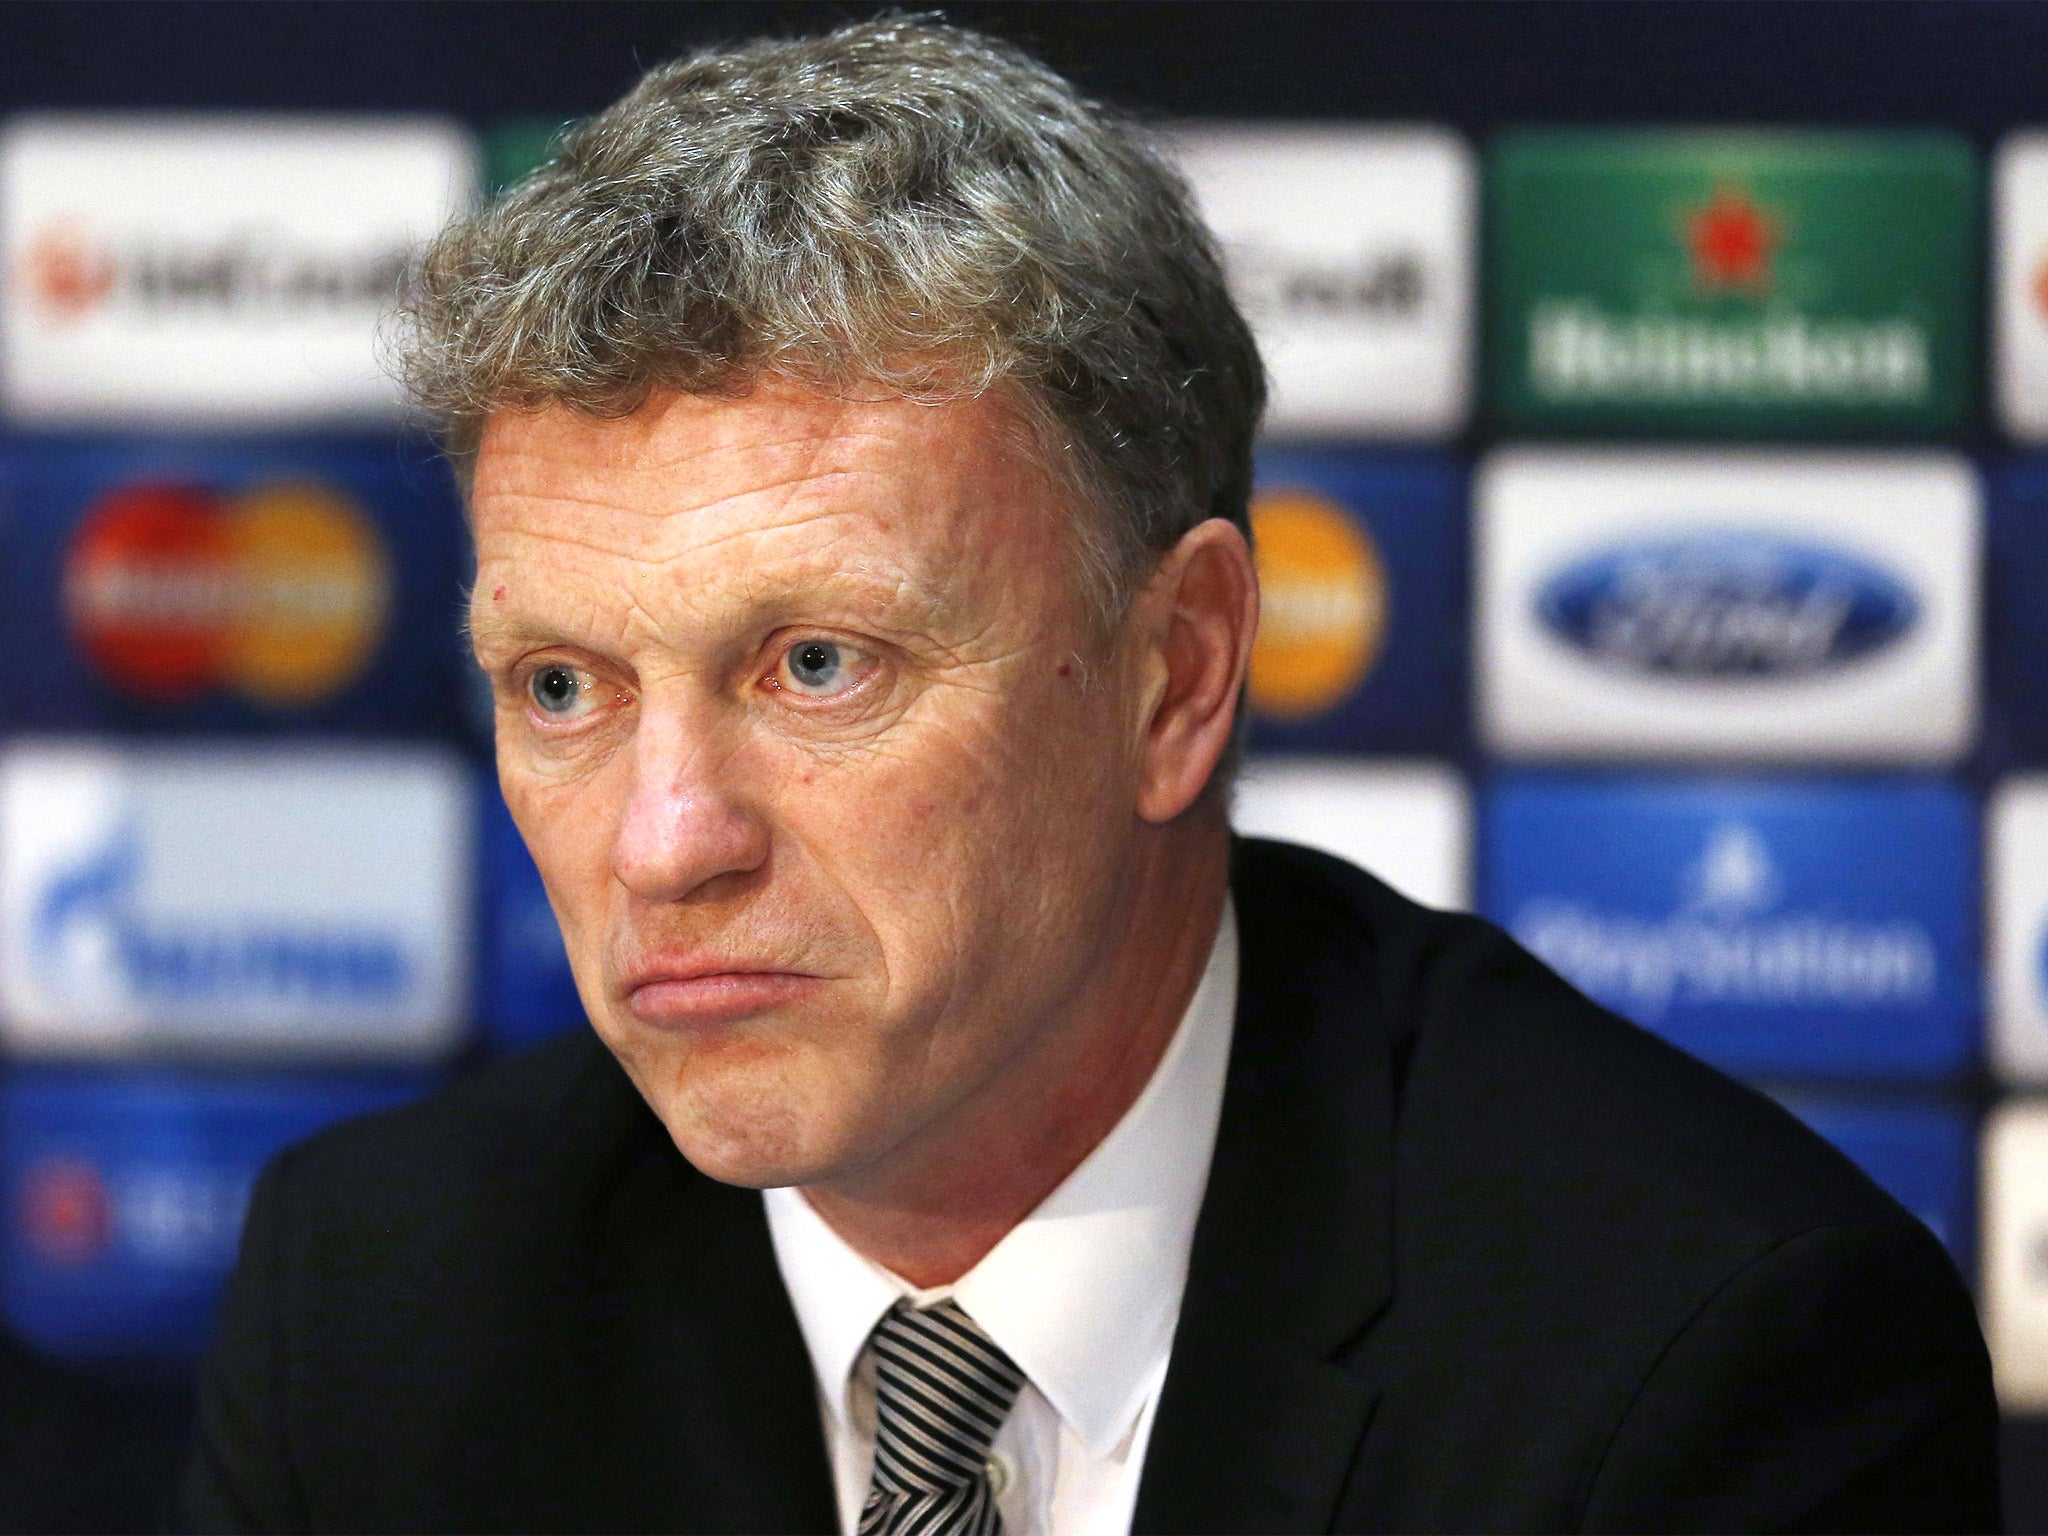 David Moyes doesn't fear losing his job even if Manchester United are knocked out of the Champions League by Olympiakos